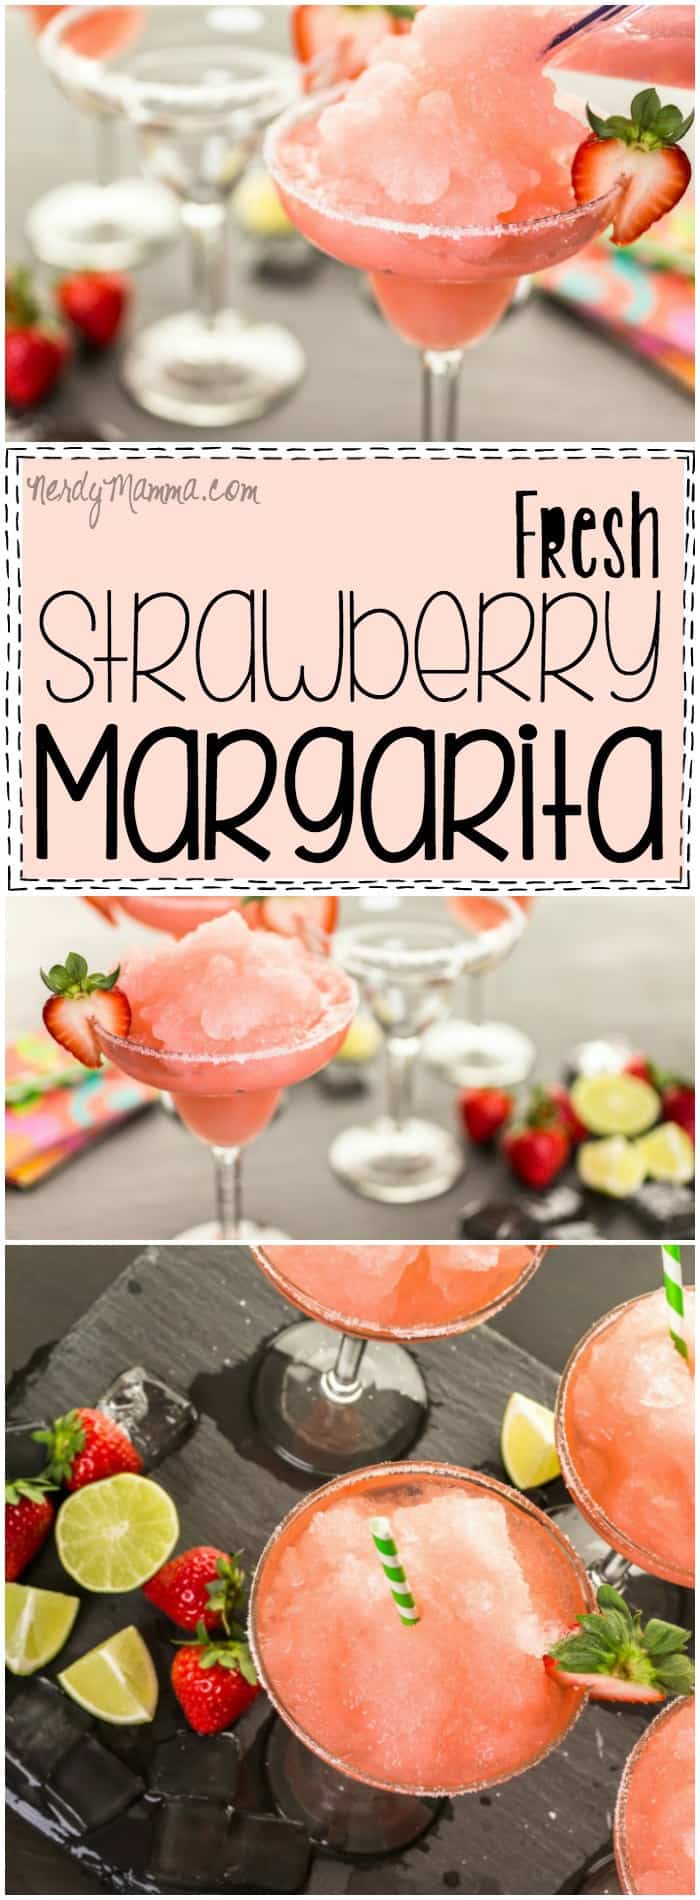 Have you ever had a margarita made from fresh strawberries Me neither! I can't wait to try this recipe, though! Definitely saving this pin!